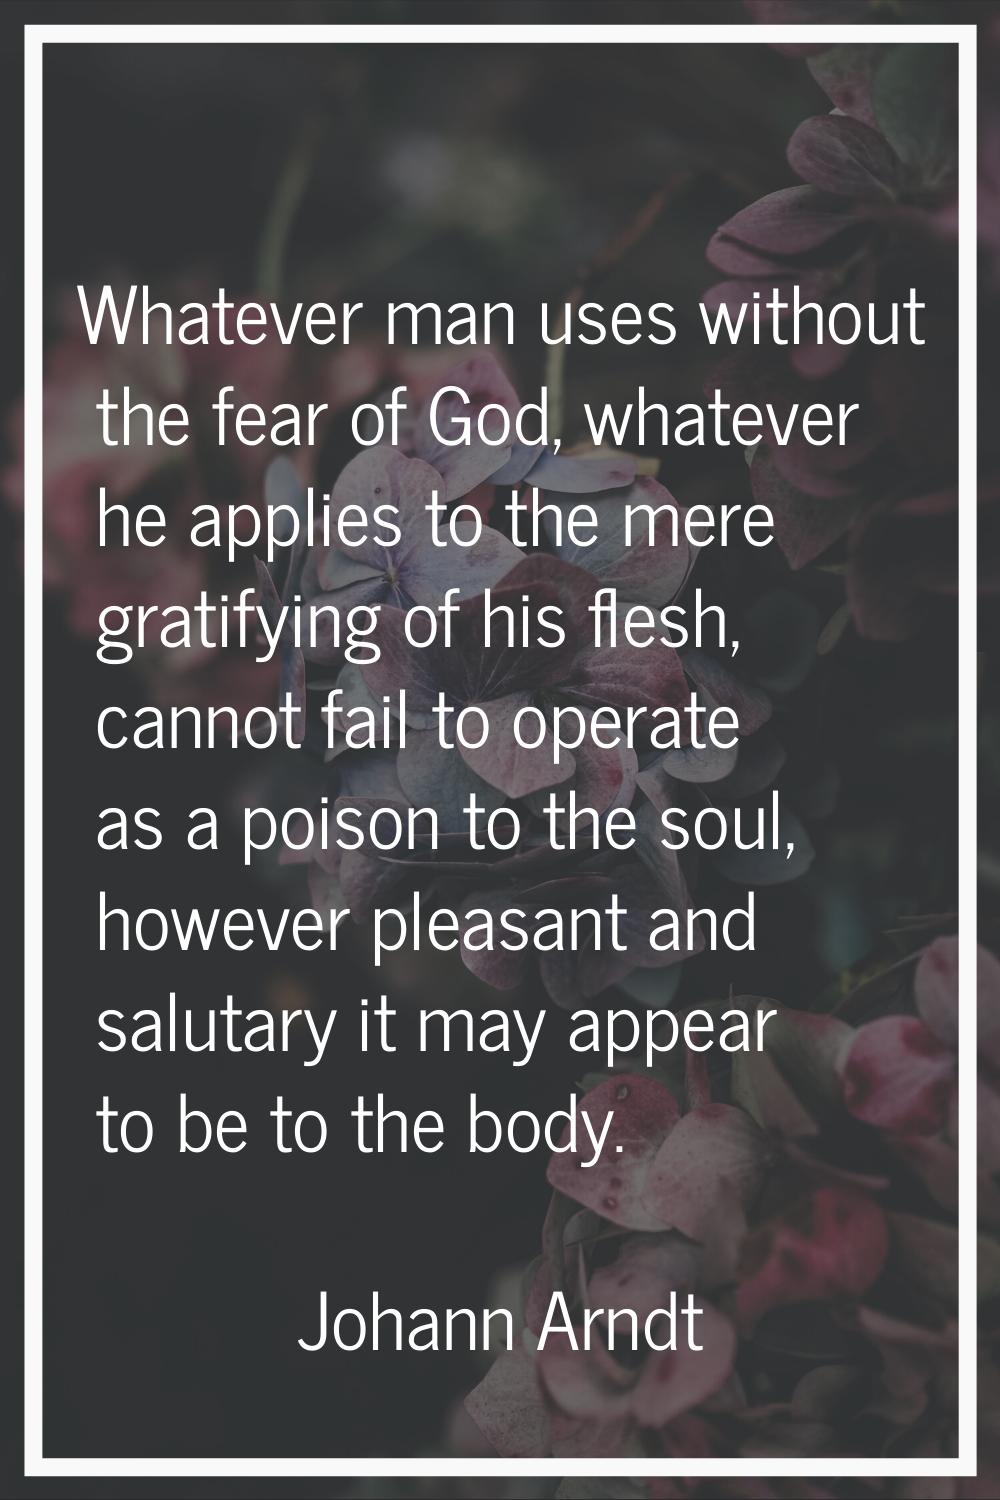 Whatever man uses without the fear of God, whatever he applies to the mere gratifying of his flesh,